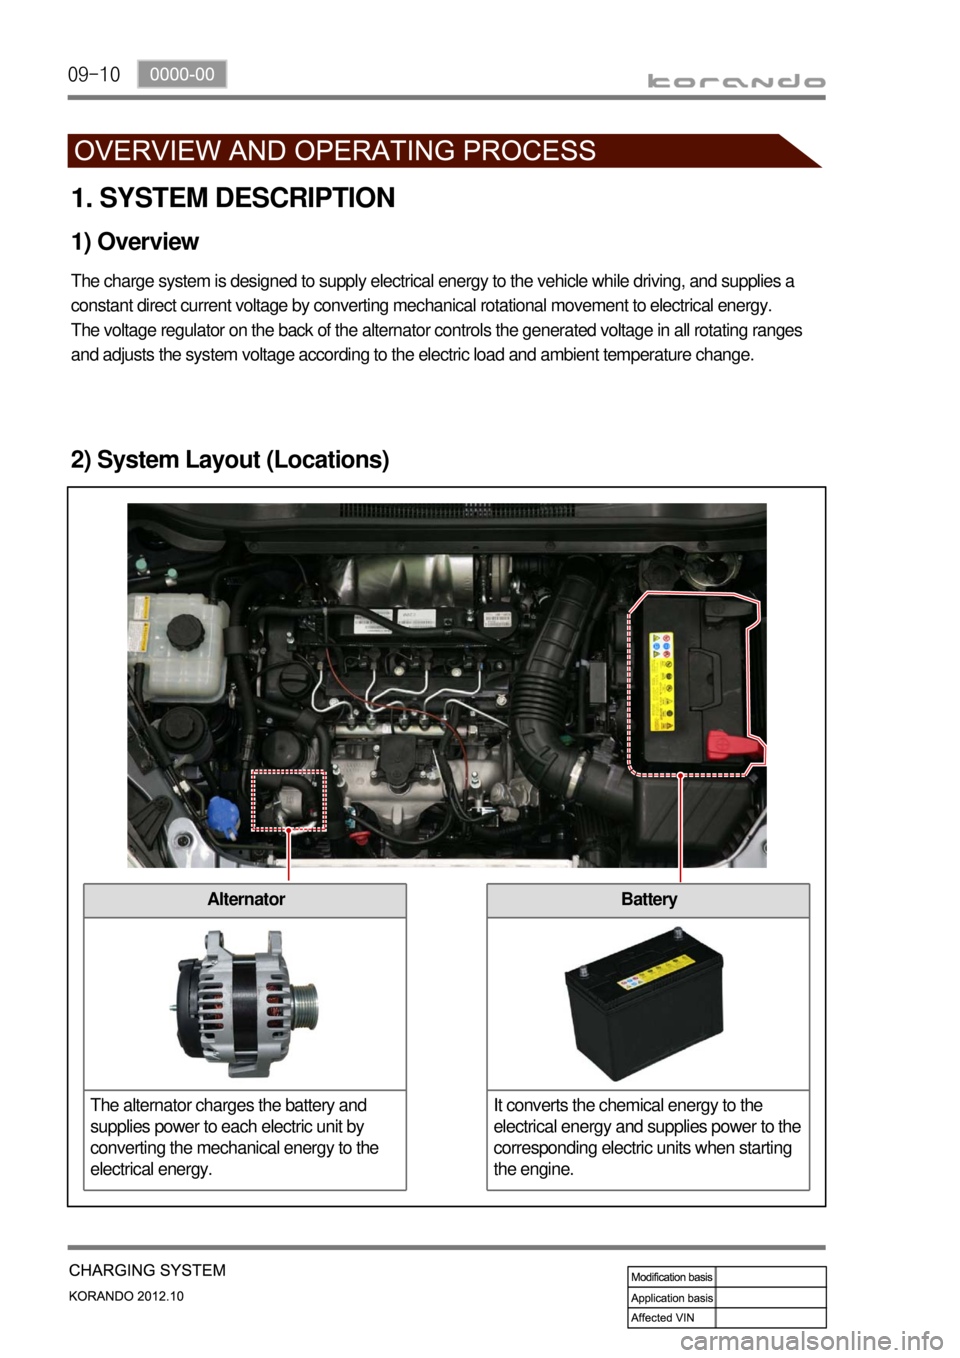 SSANGYONG KORANDO 2012  Service Manual 09-10
Battery
It converts the chemical energy to the 
electrical energy and supplies power to the 
corresponding electric units when starting 
the engine.Alternator
The alternator charges the battery 